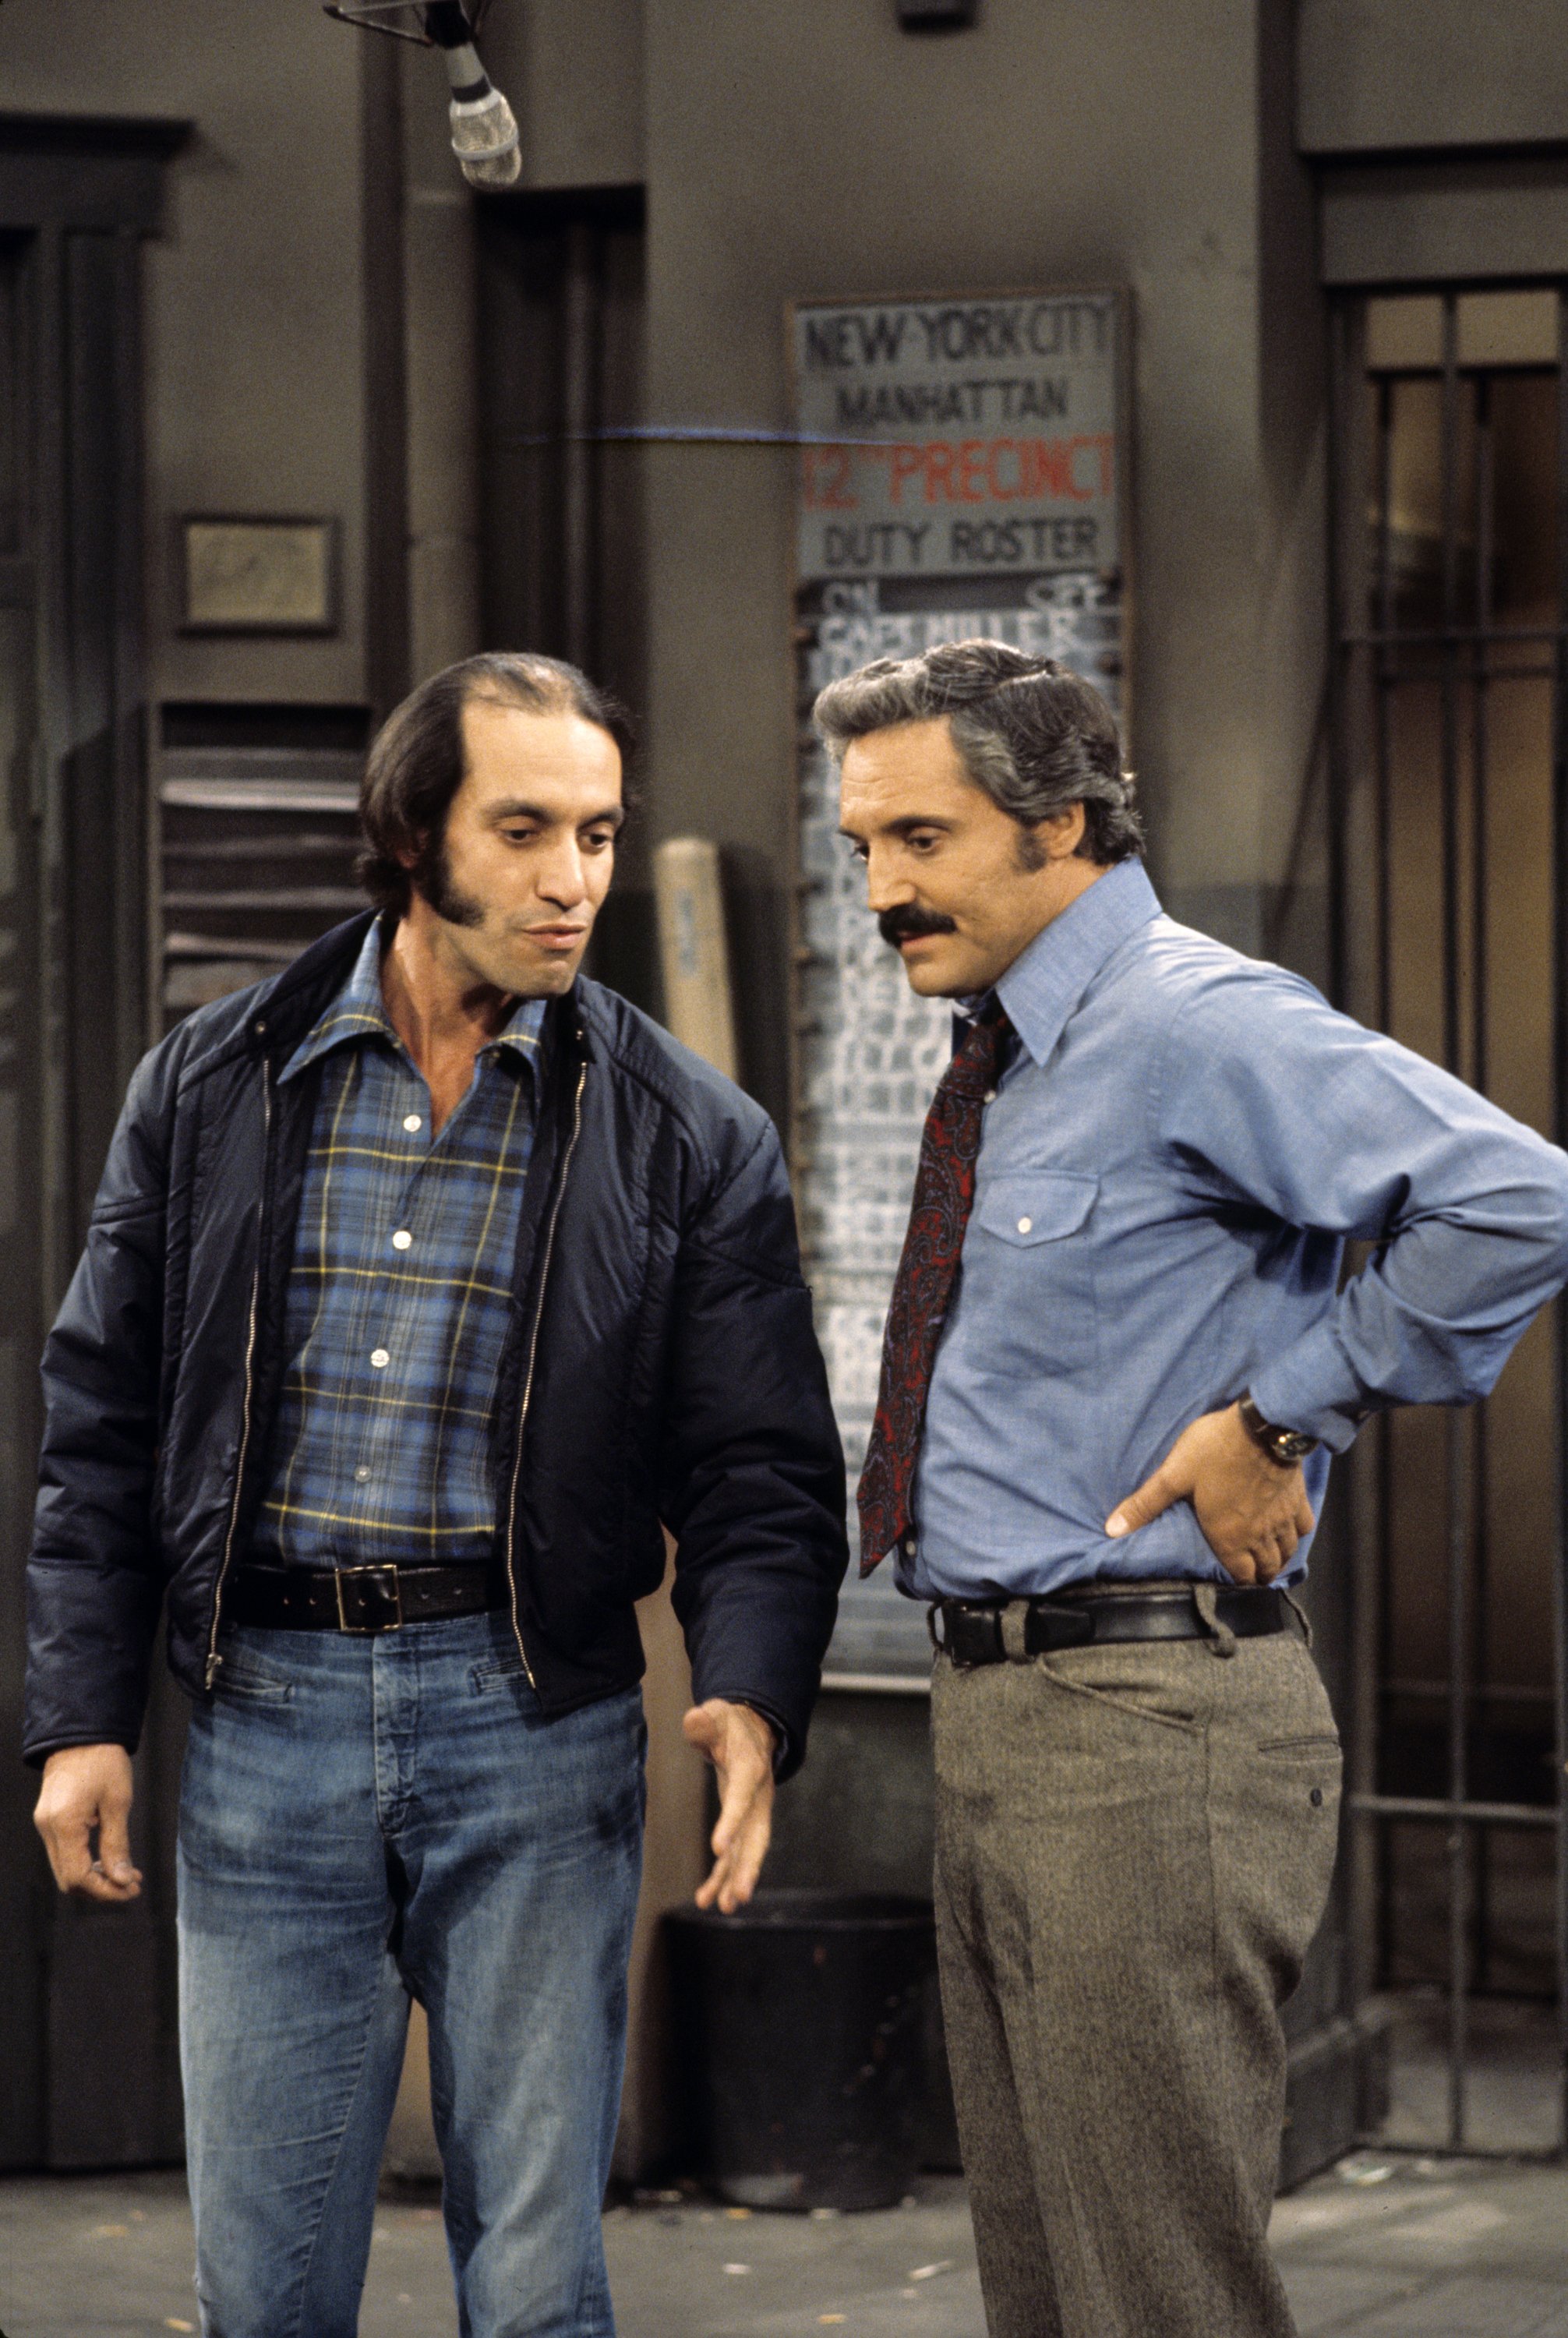 Gregory Sierra (left) and Hal Linden (right) on the set of "Barney Miller" which premiered in 1975. | Photo: Getty Images.